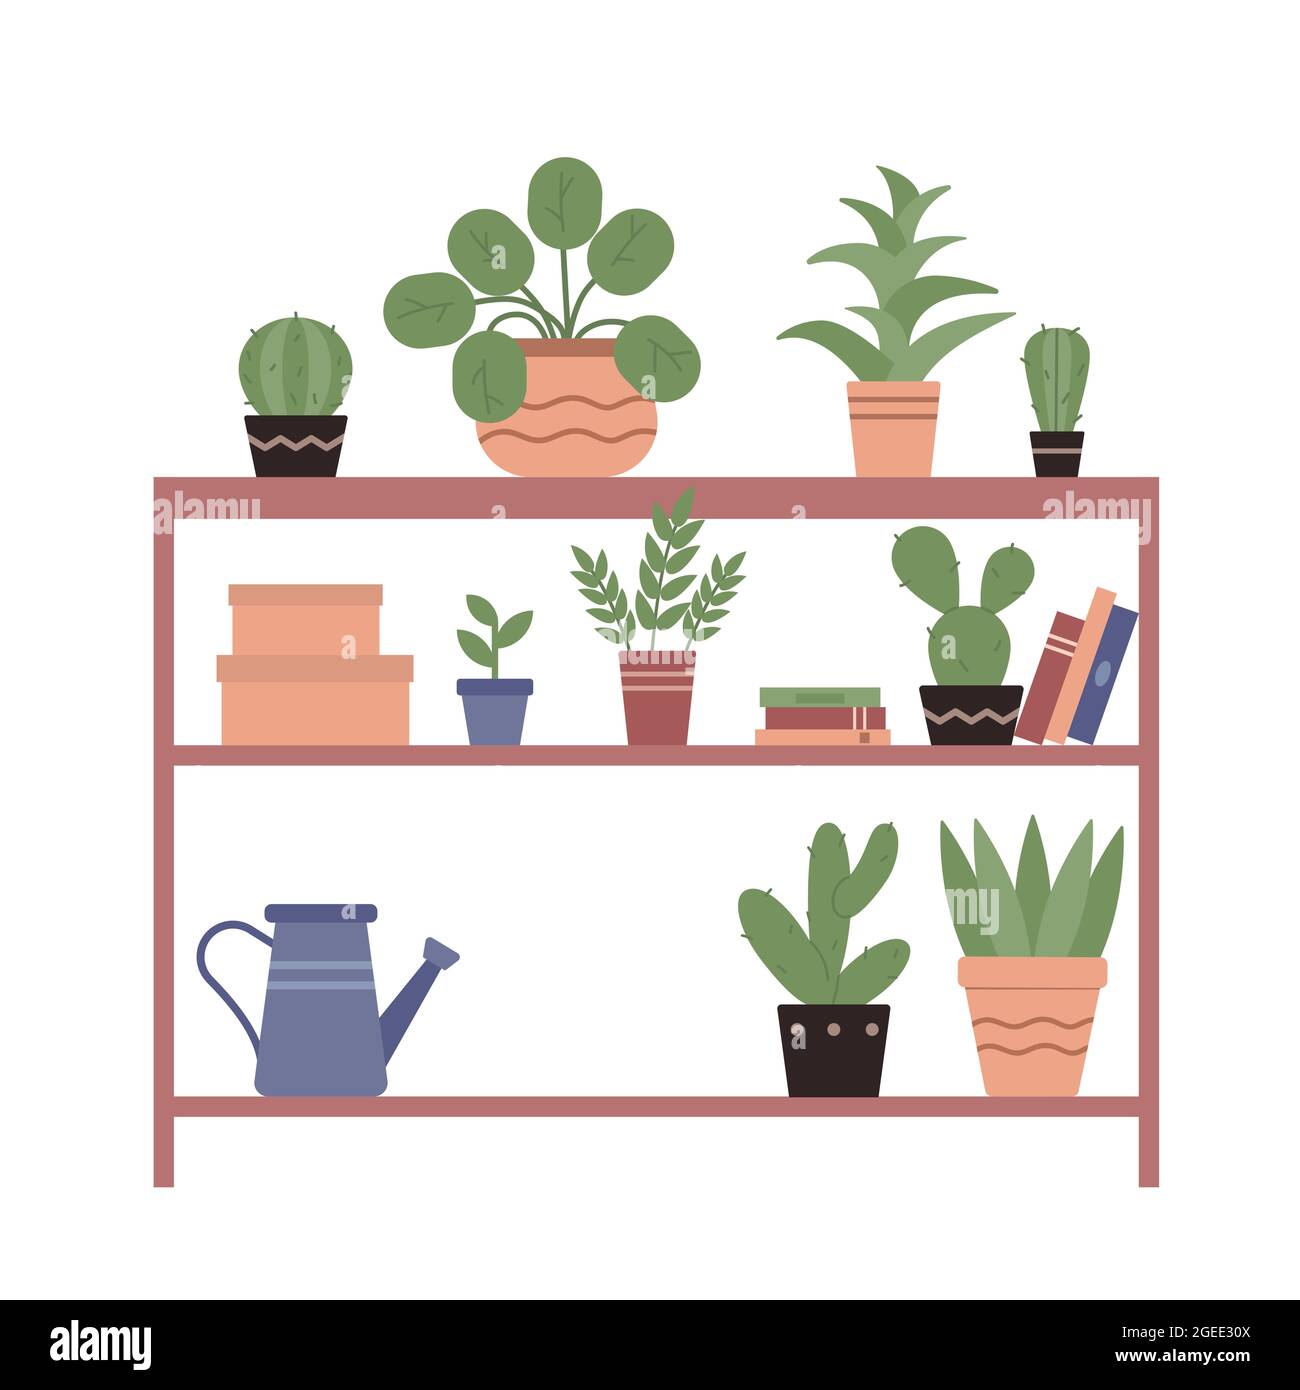 House plants in ceramic pots on wooden shelves of home nature garden vector illustration. Cartoon green houseplants, books, watering can for gardening isolated on white Stock Vector